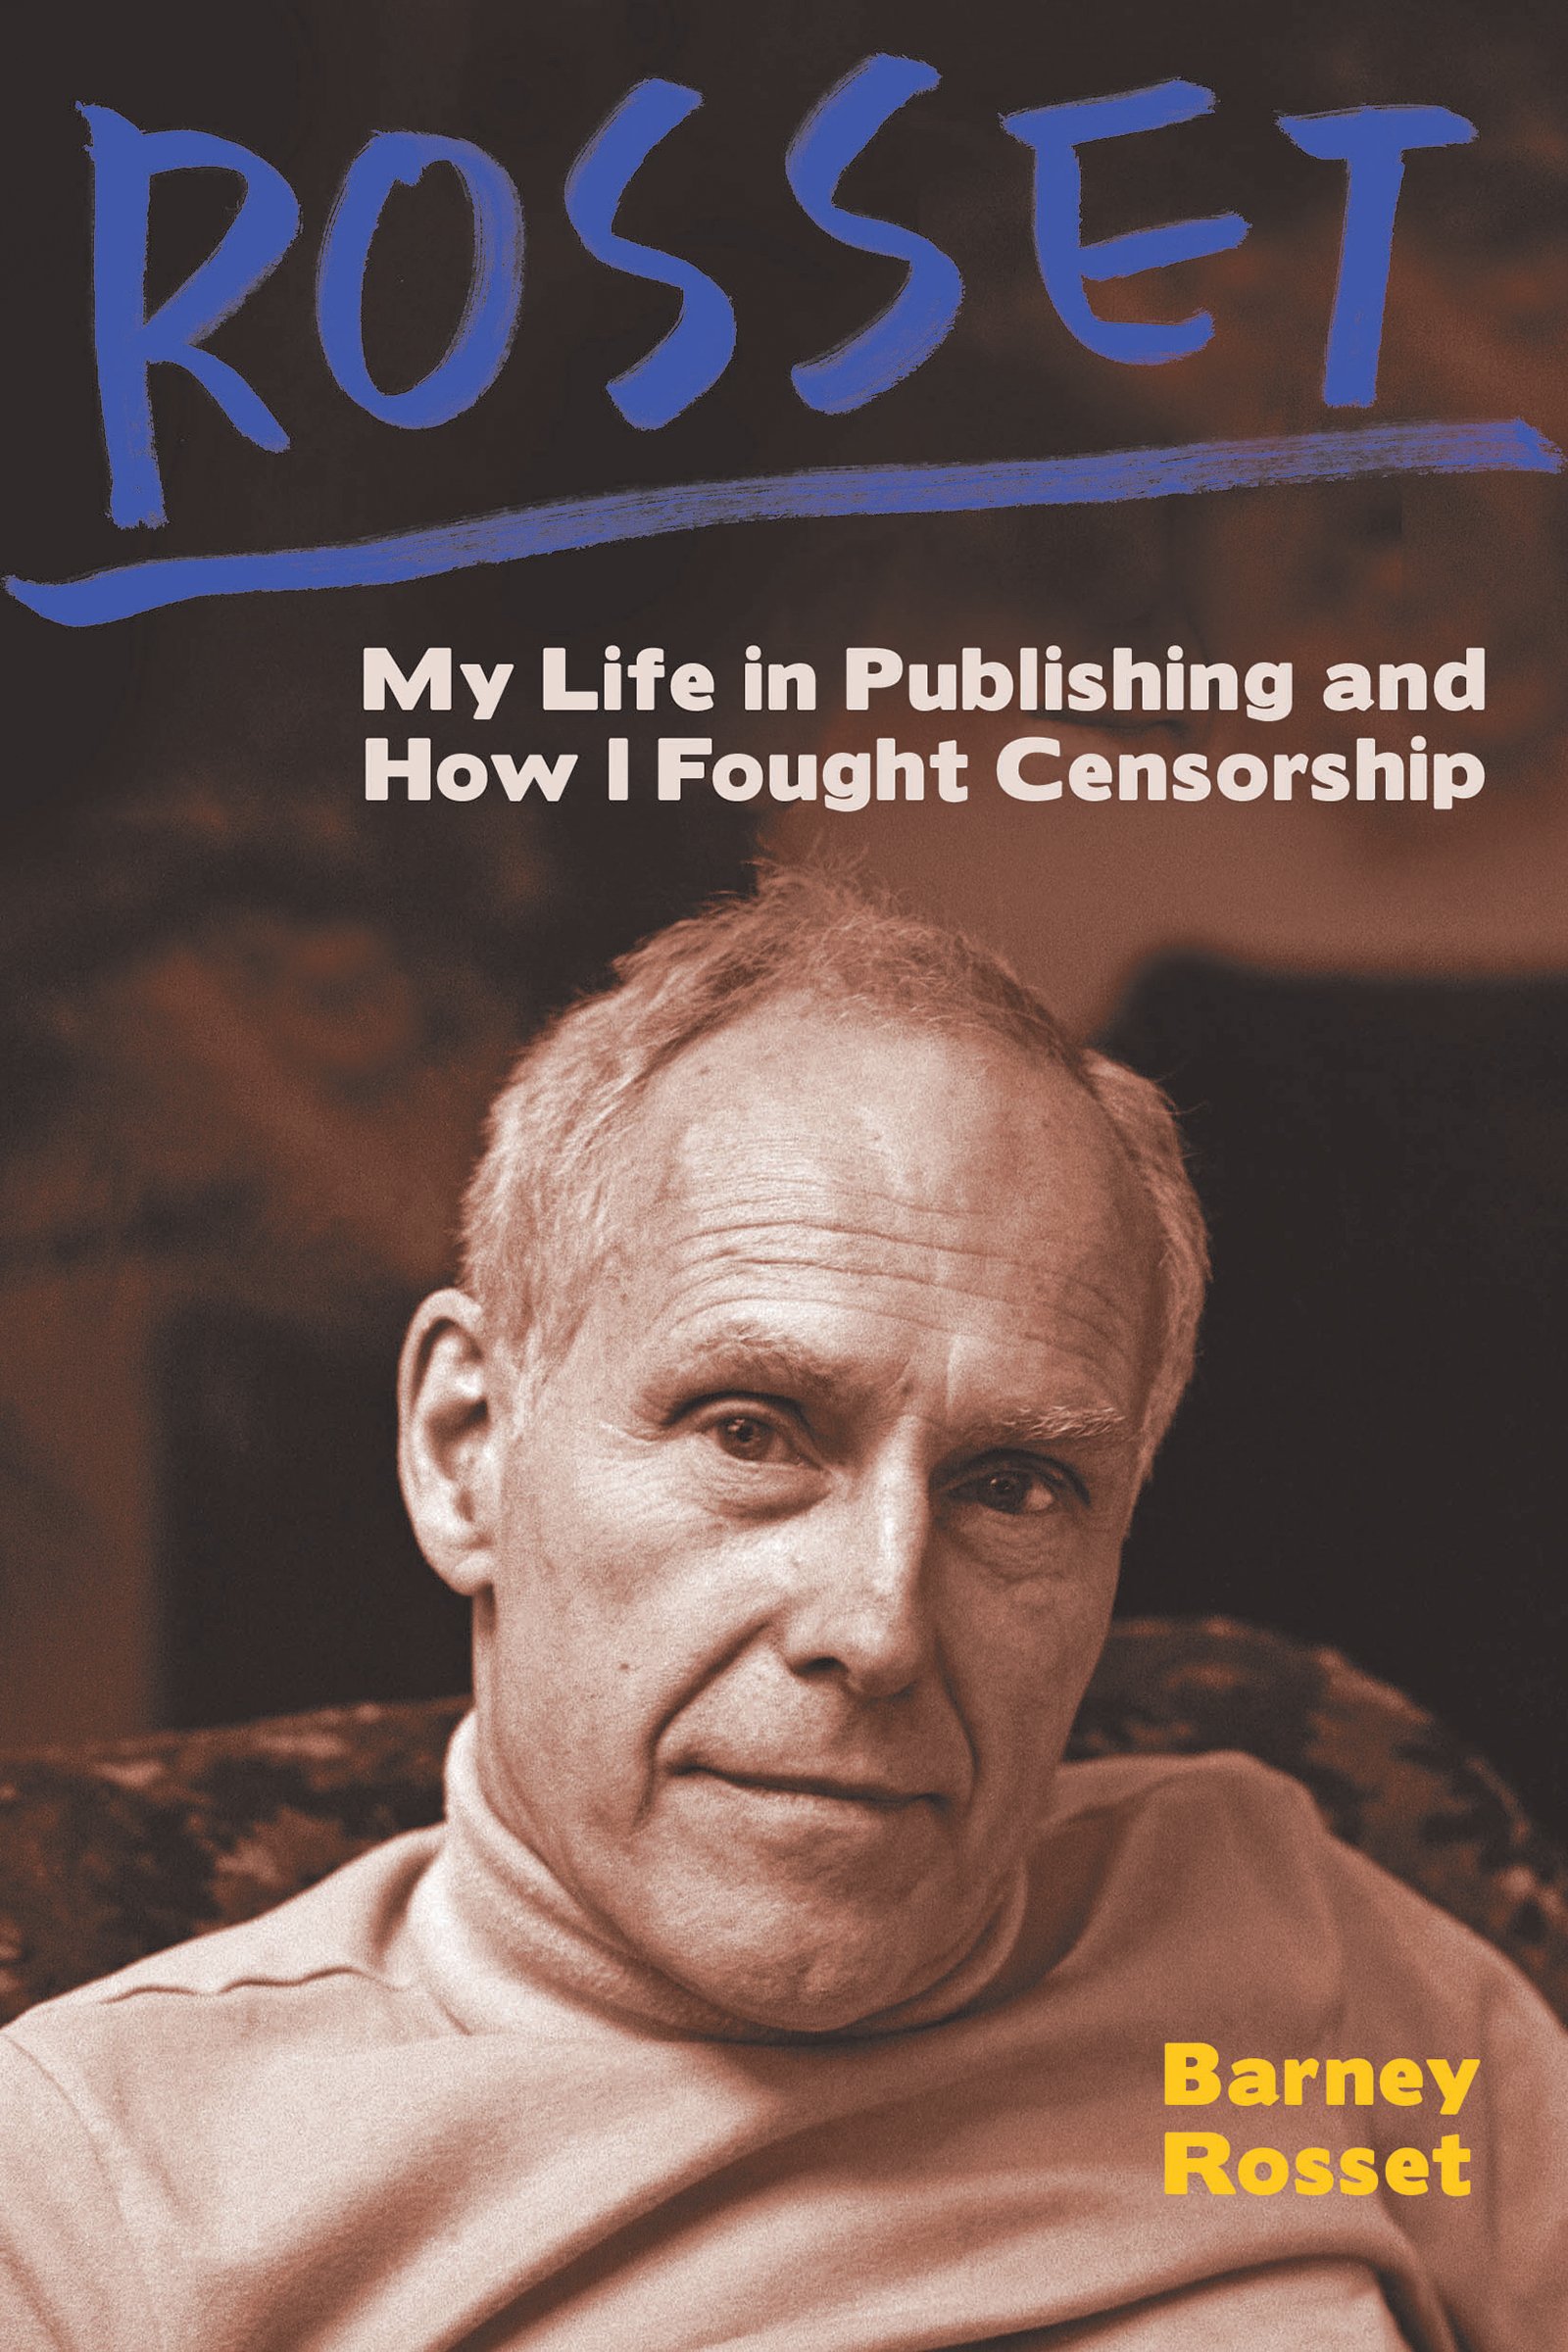 Rosset: My Life in Publishing and How I Fought Censorship